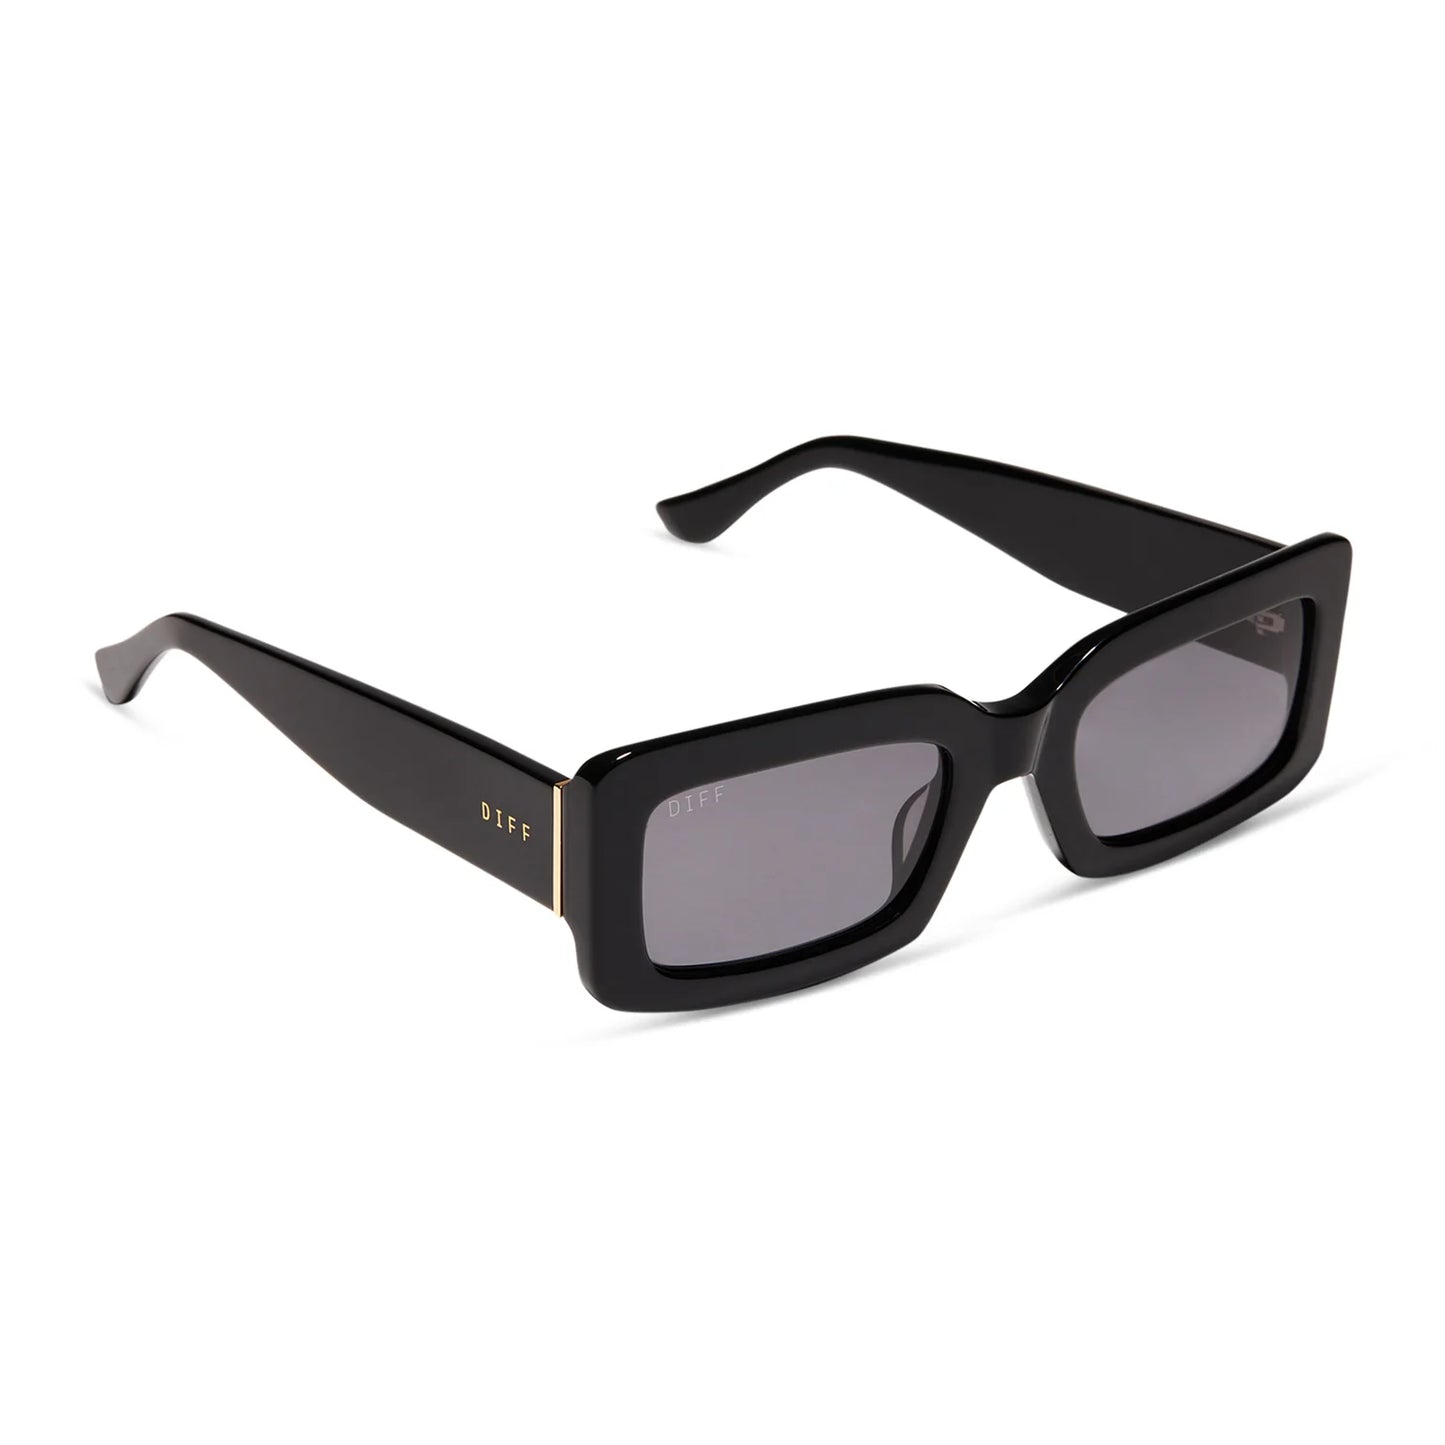 DIFF Indy Rectangle Sunglasses